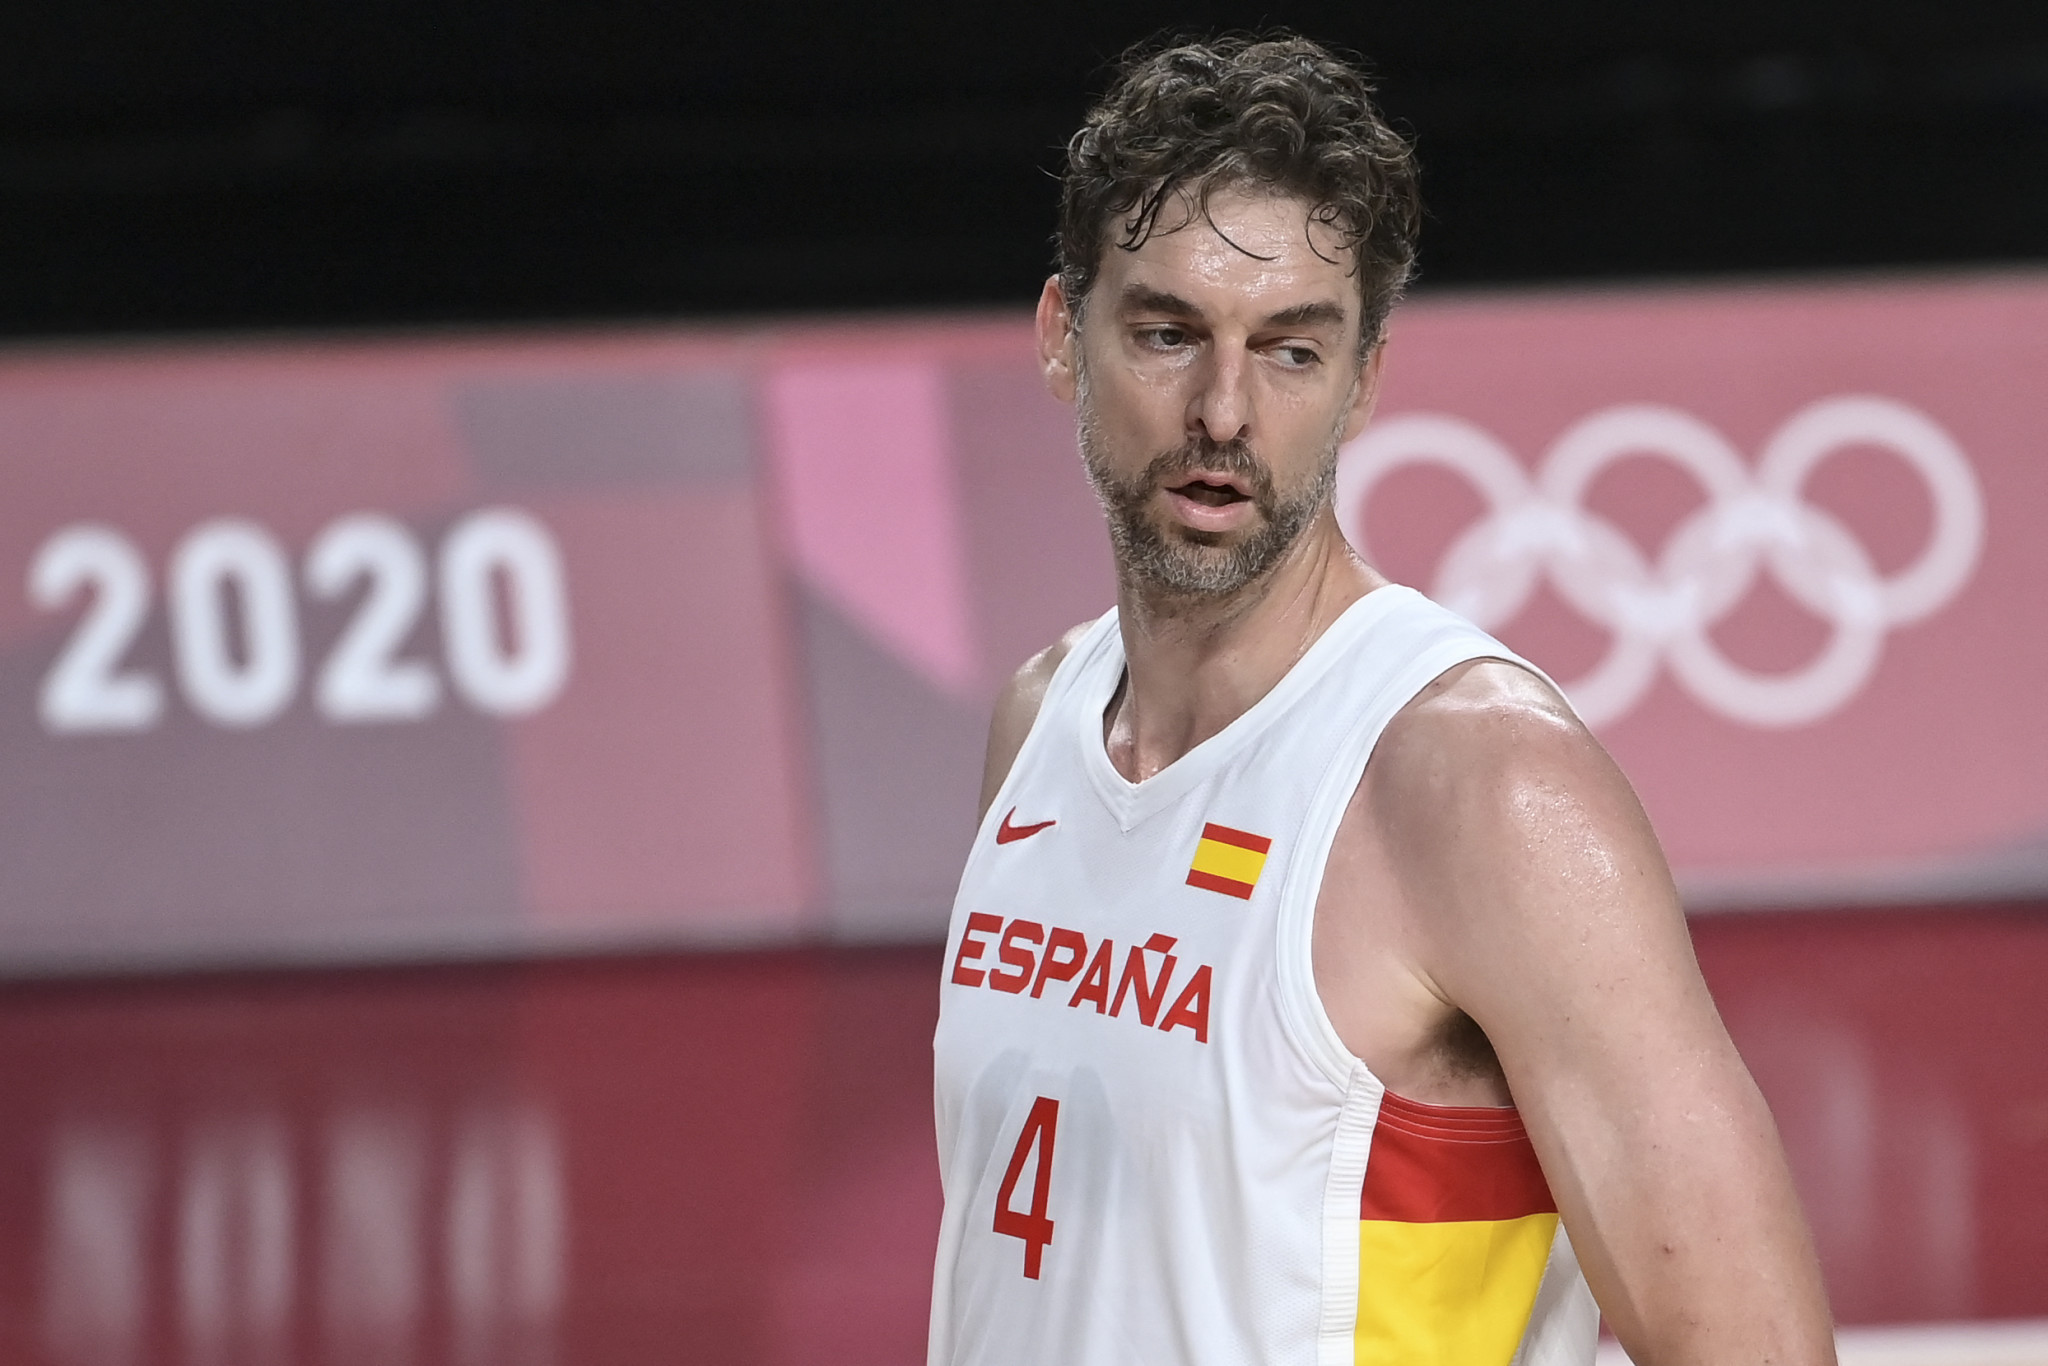 Three-time Olympic basketball medallist Gasol elected to IOC Ethics Commission